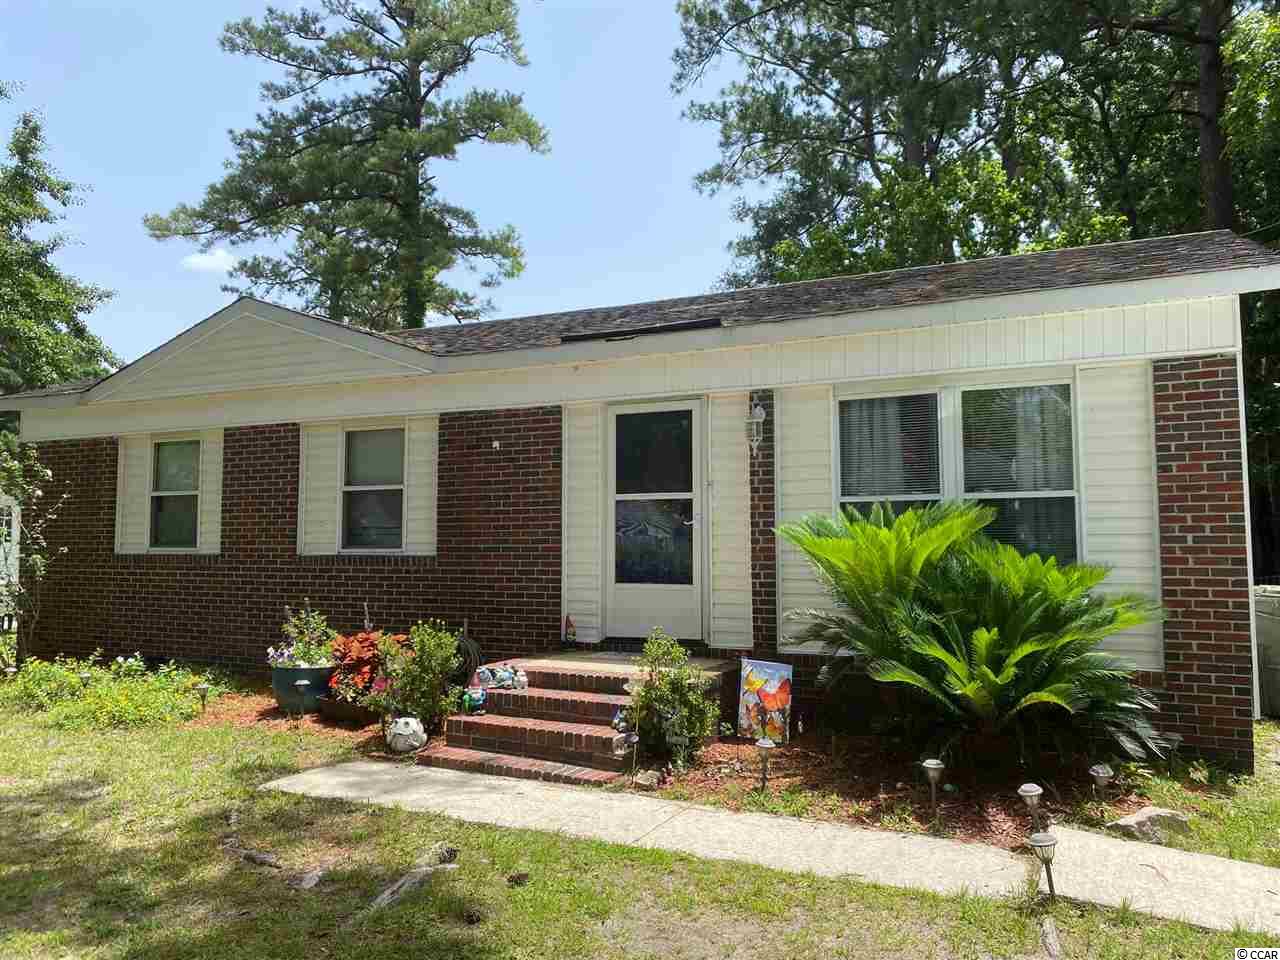 2507 Withers St. Georgetown, SC 29440